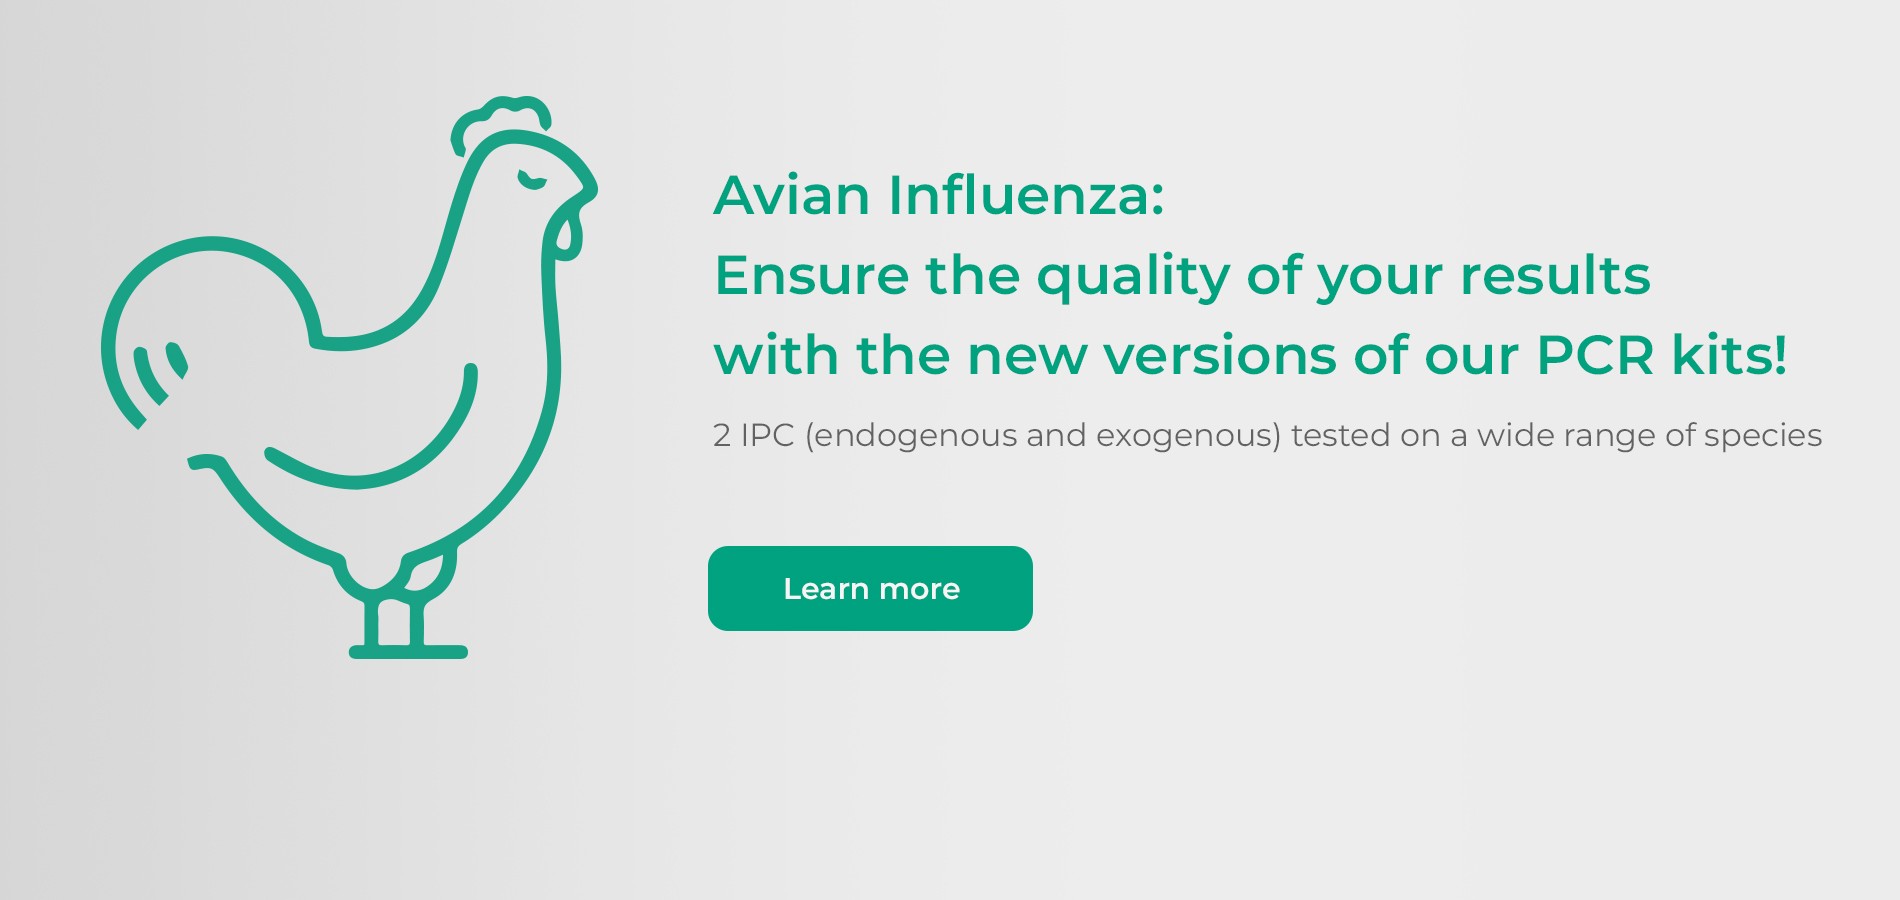 Avian Influenza: Ensure the conformity and the quality of your results thanks to the new versions of our PCR kits!